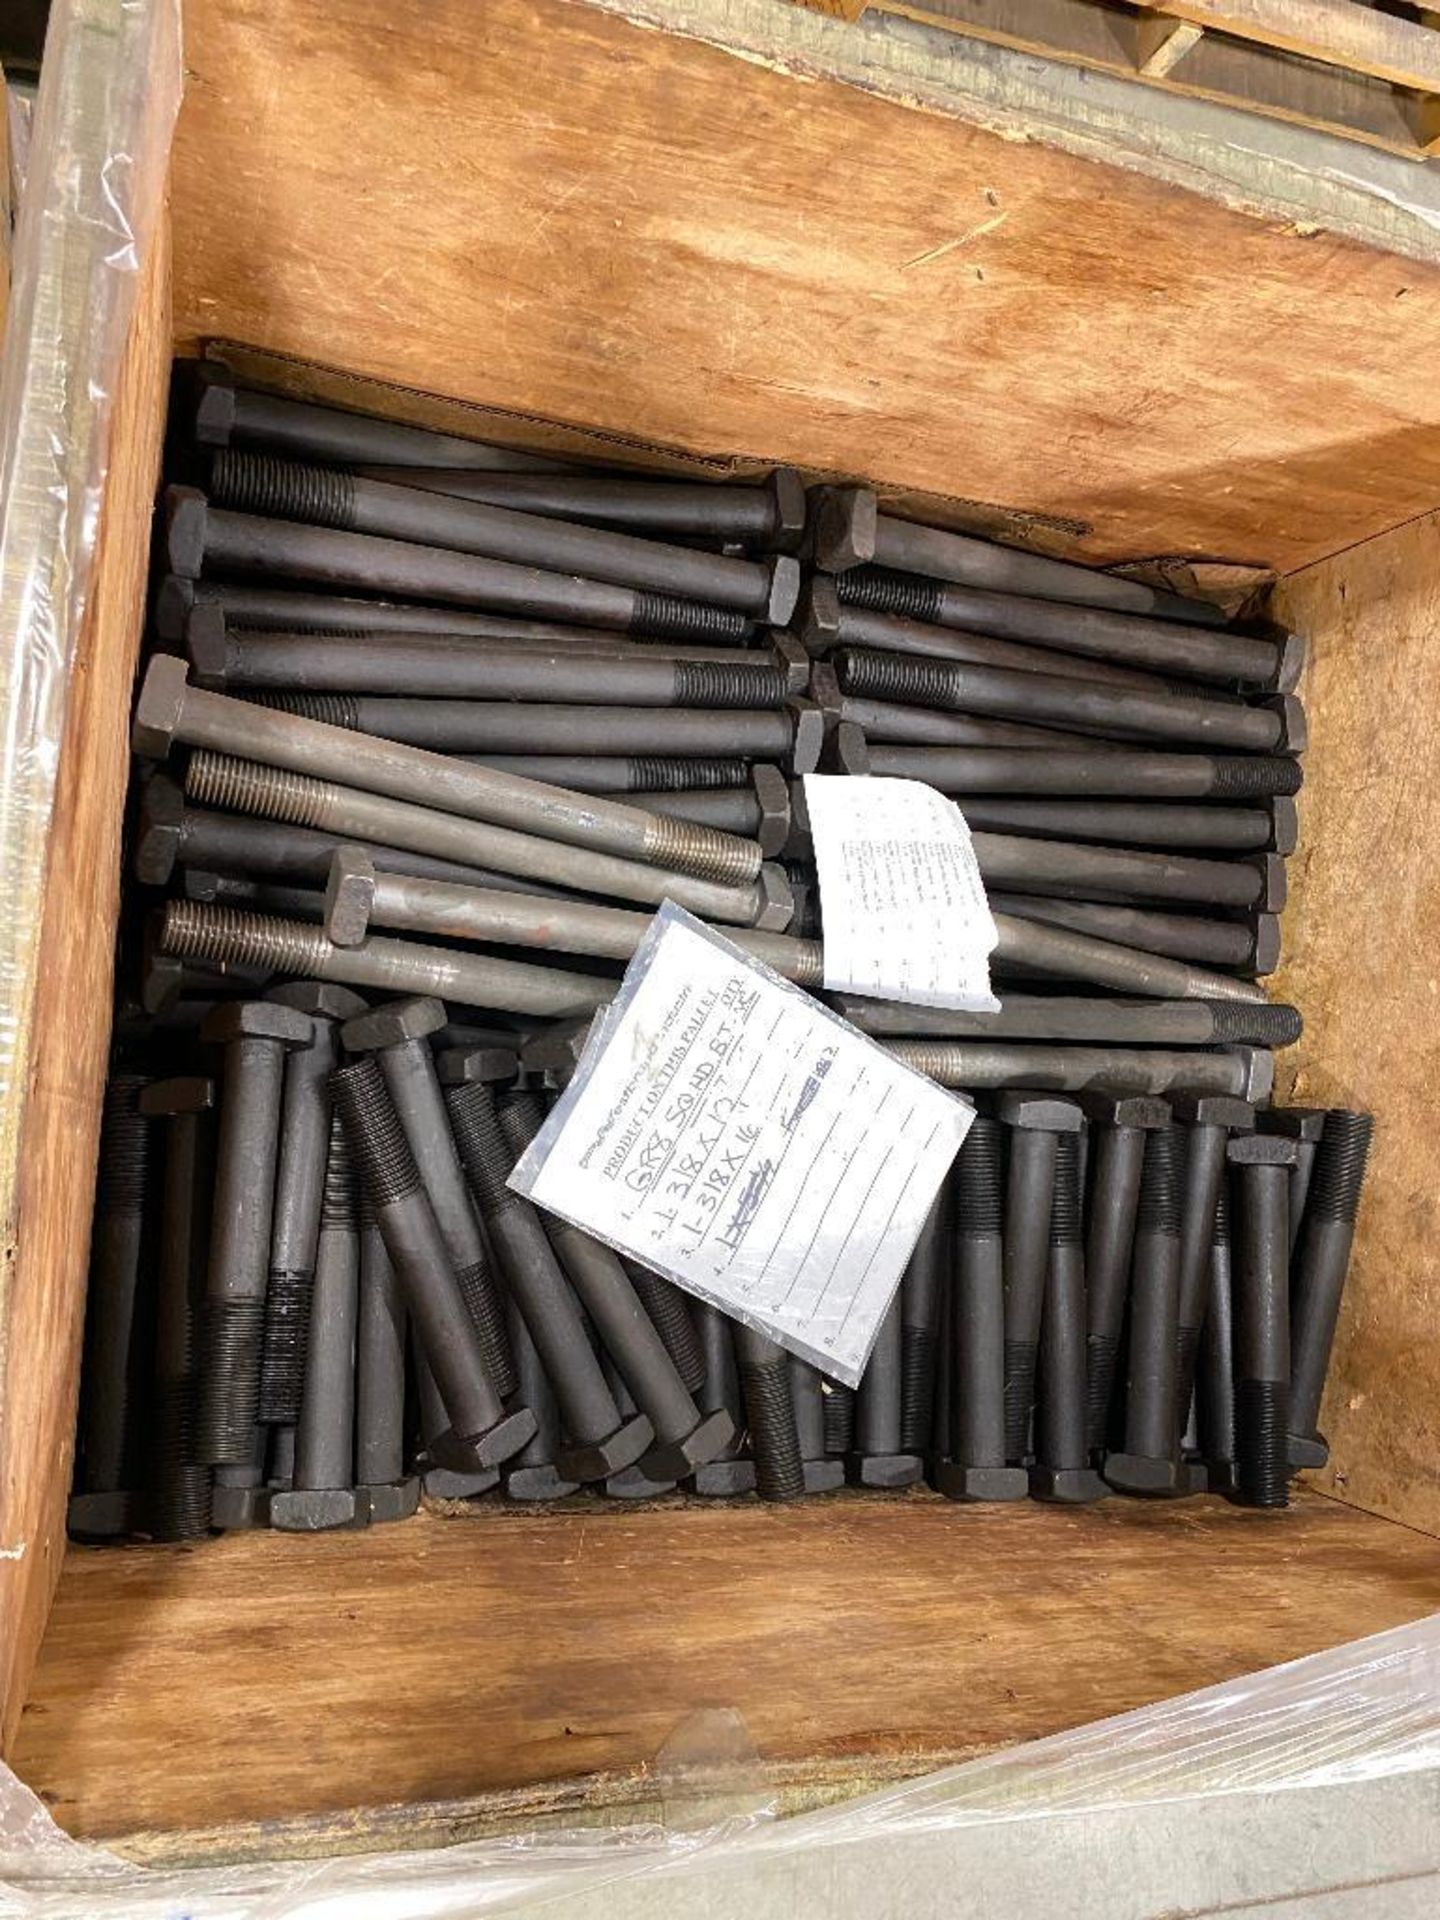 Crate of Asst. 1-3/8" x 10" & 1-3/8" x 16" Square Heavy Duty Bolts - Image 3 of 3